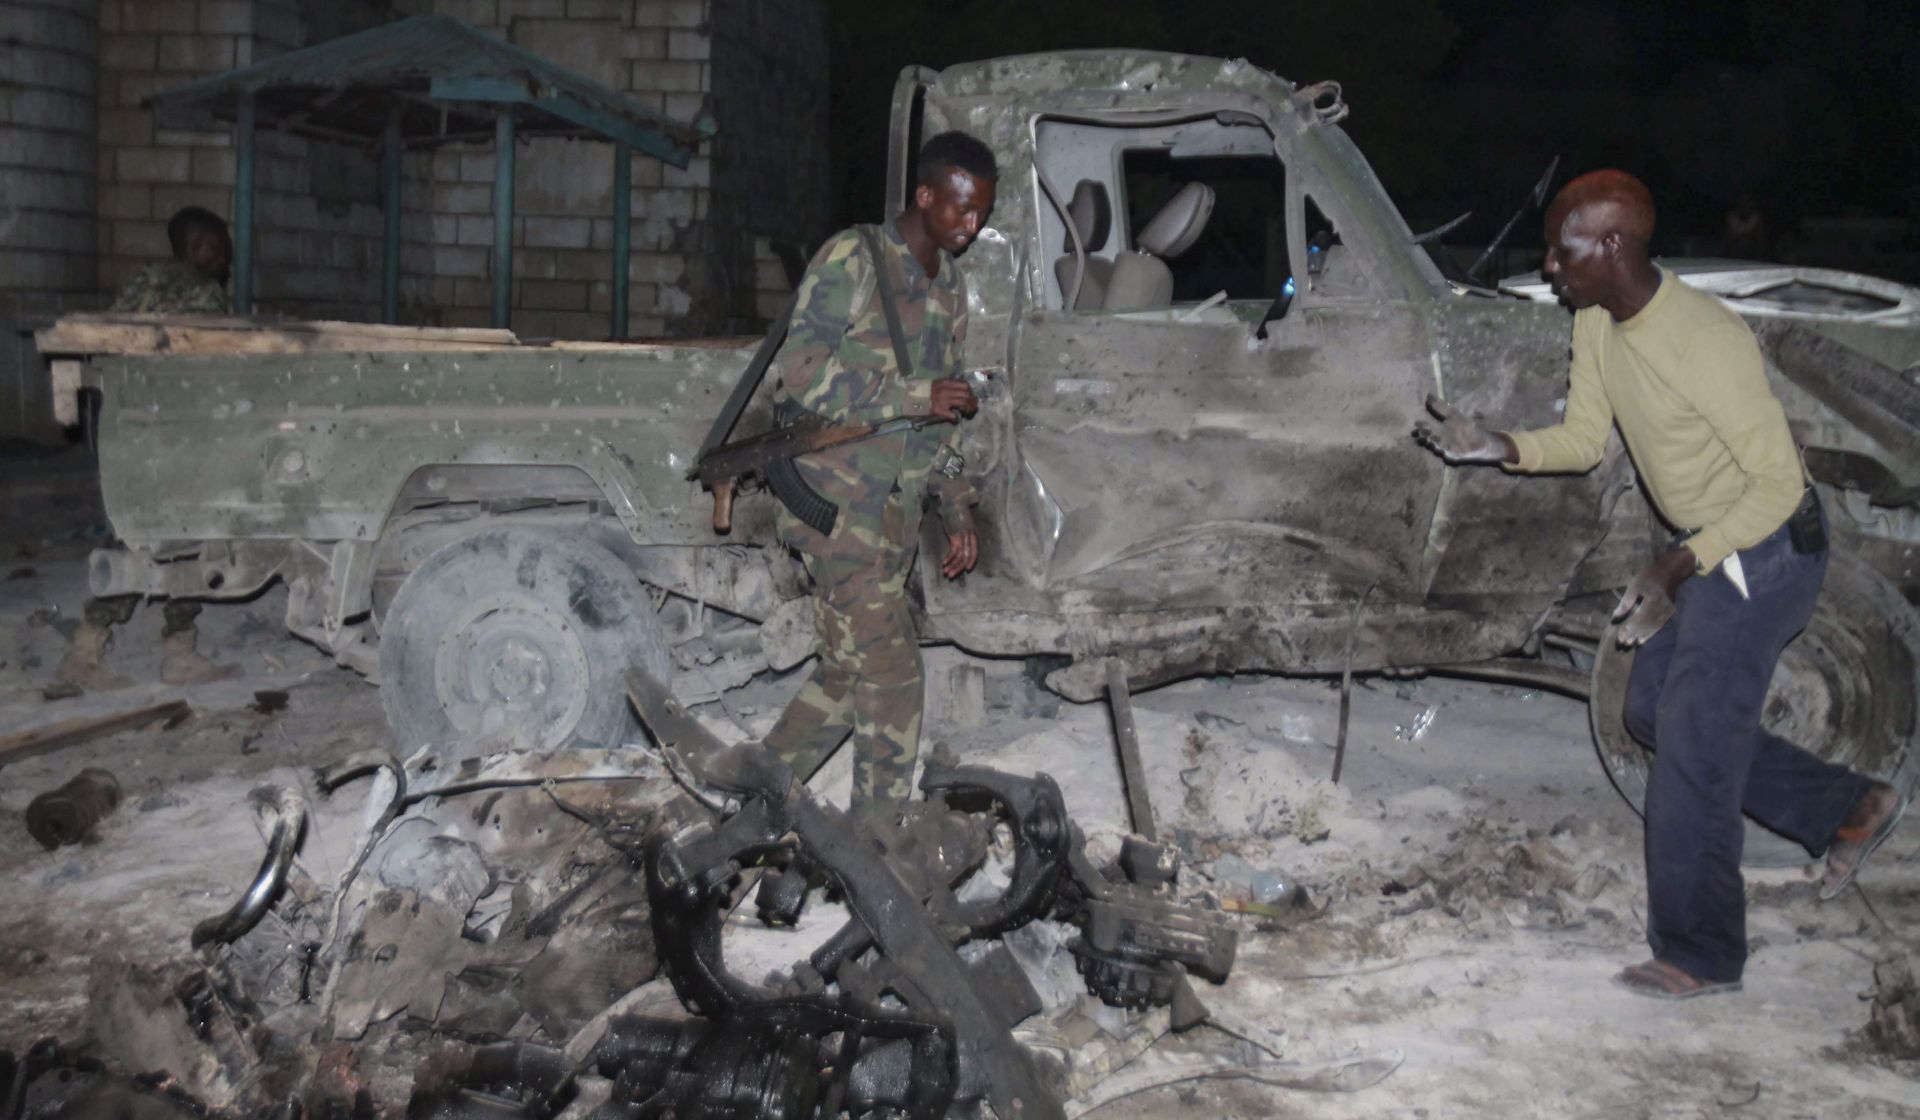 epa05619160 Somali security officers inspect the scene of a car bomb attack near parliament in the capital Mogadishu, Somalia, 05 November 2016. A suicide car bomber attacked an army convoy on 05 November, killing at least two police officers, according to the Somali police. The country's Islamist militant group al-Shabab claimed responsibility for the latest attack.  EPA/SAID YUSUF WARSAME